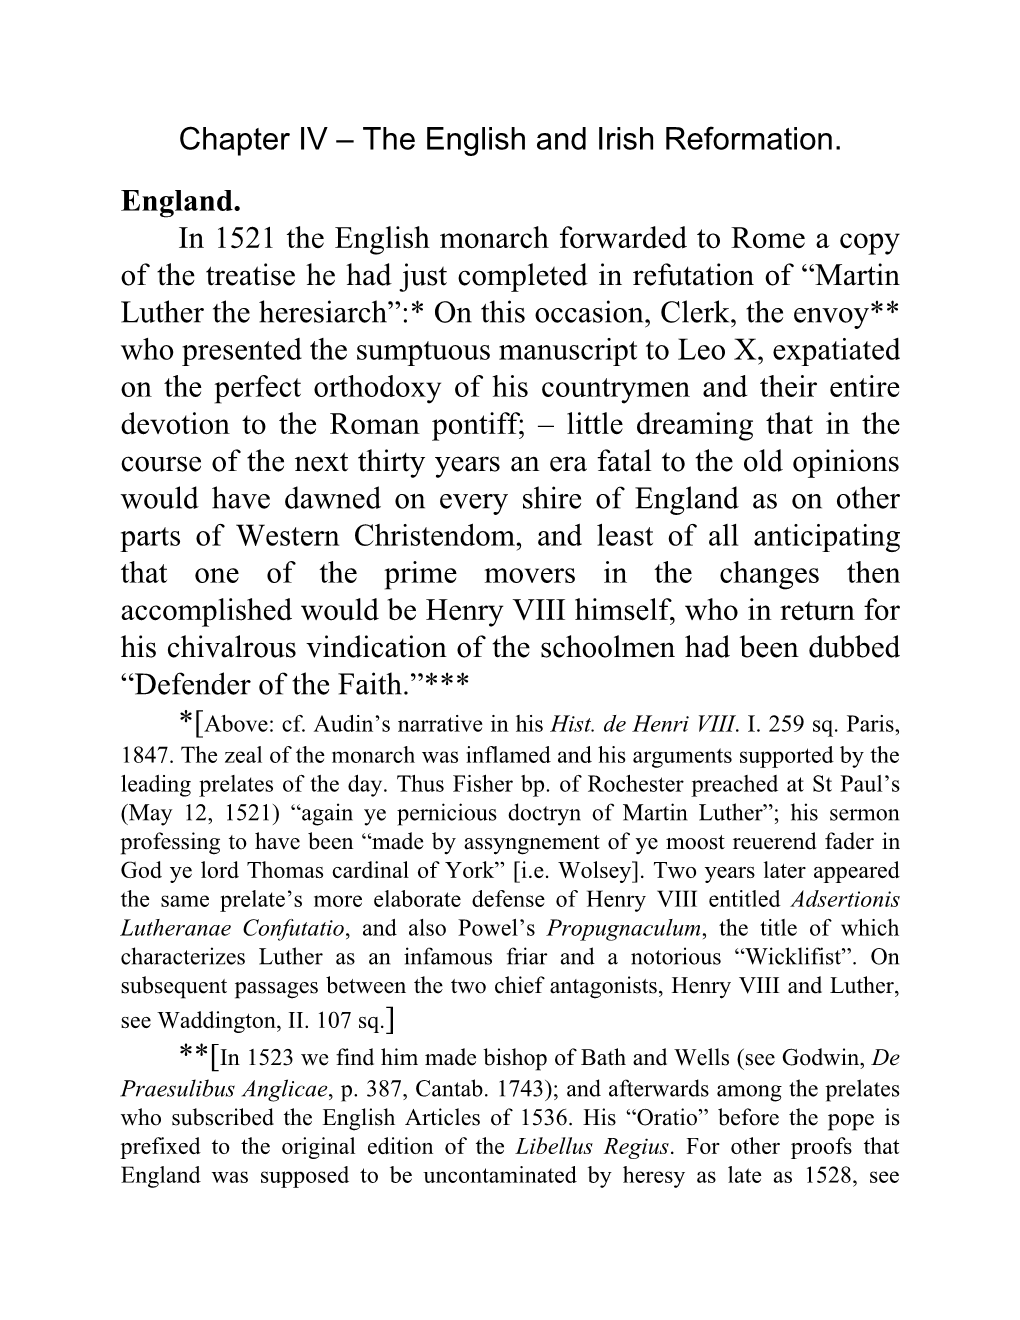 Chapter IV – the English and Irish Reformation. England. in 1521